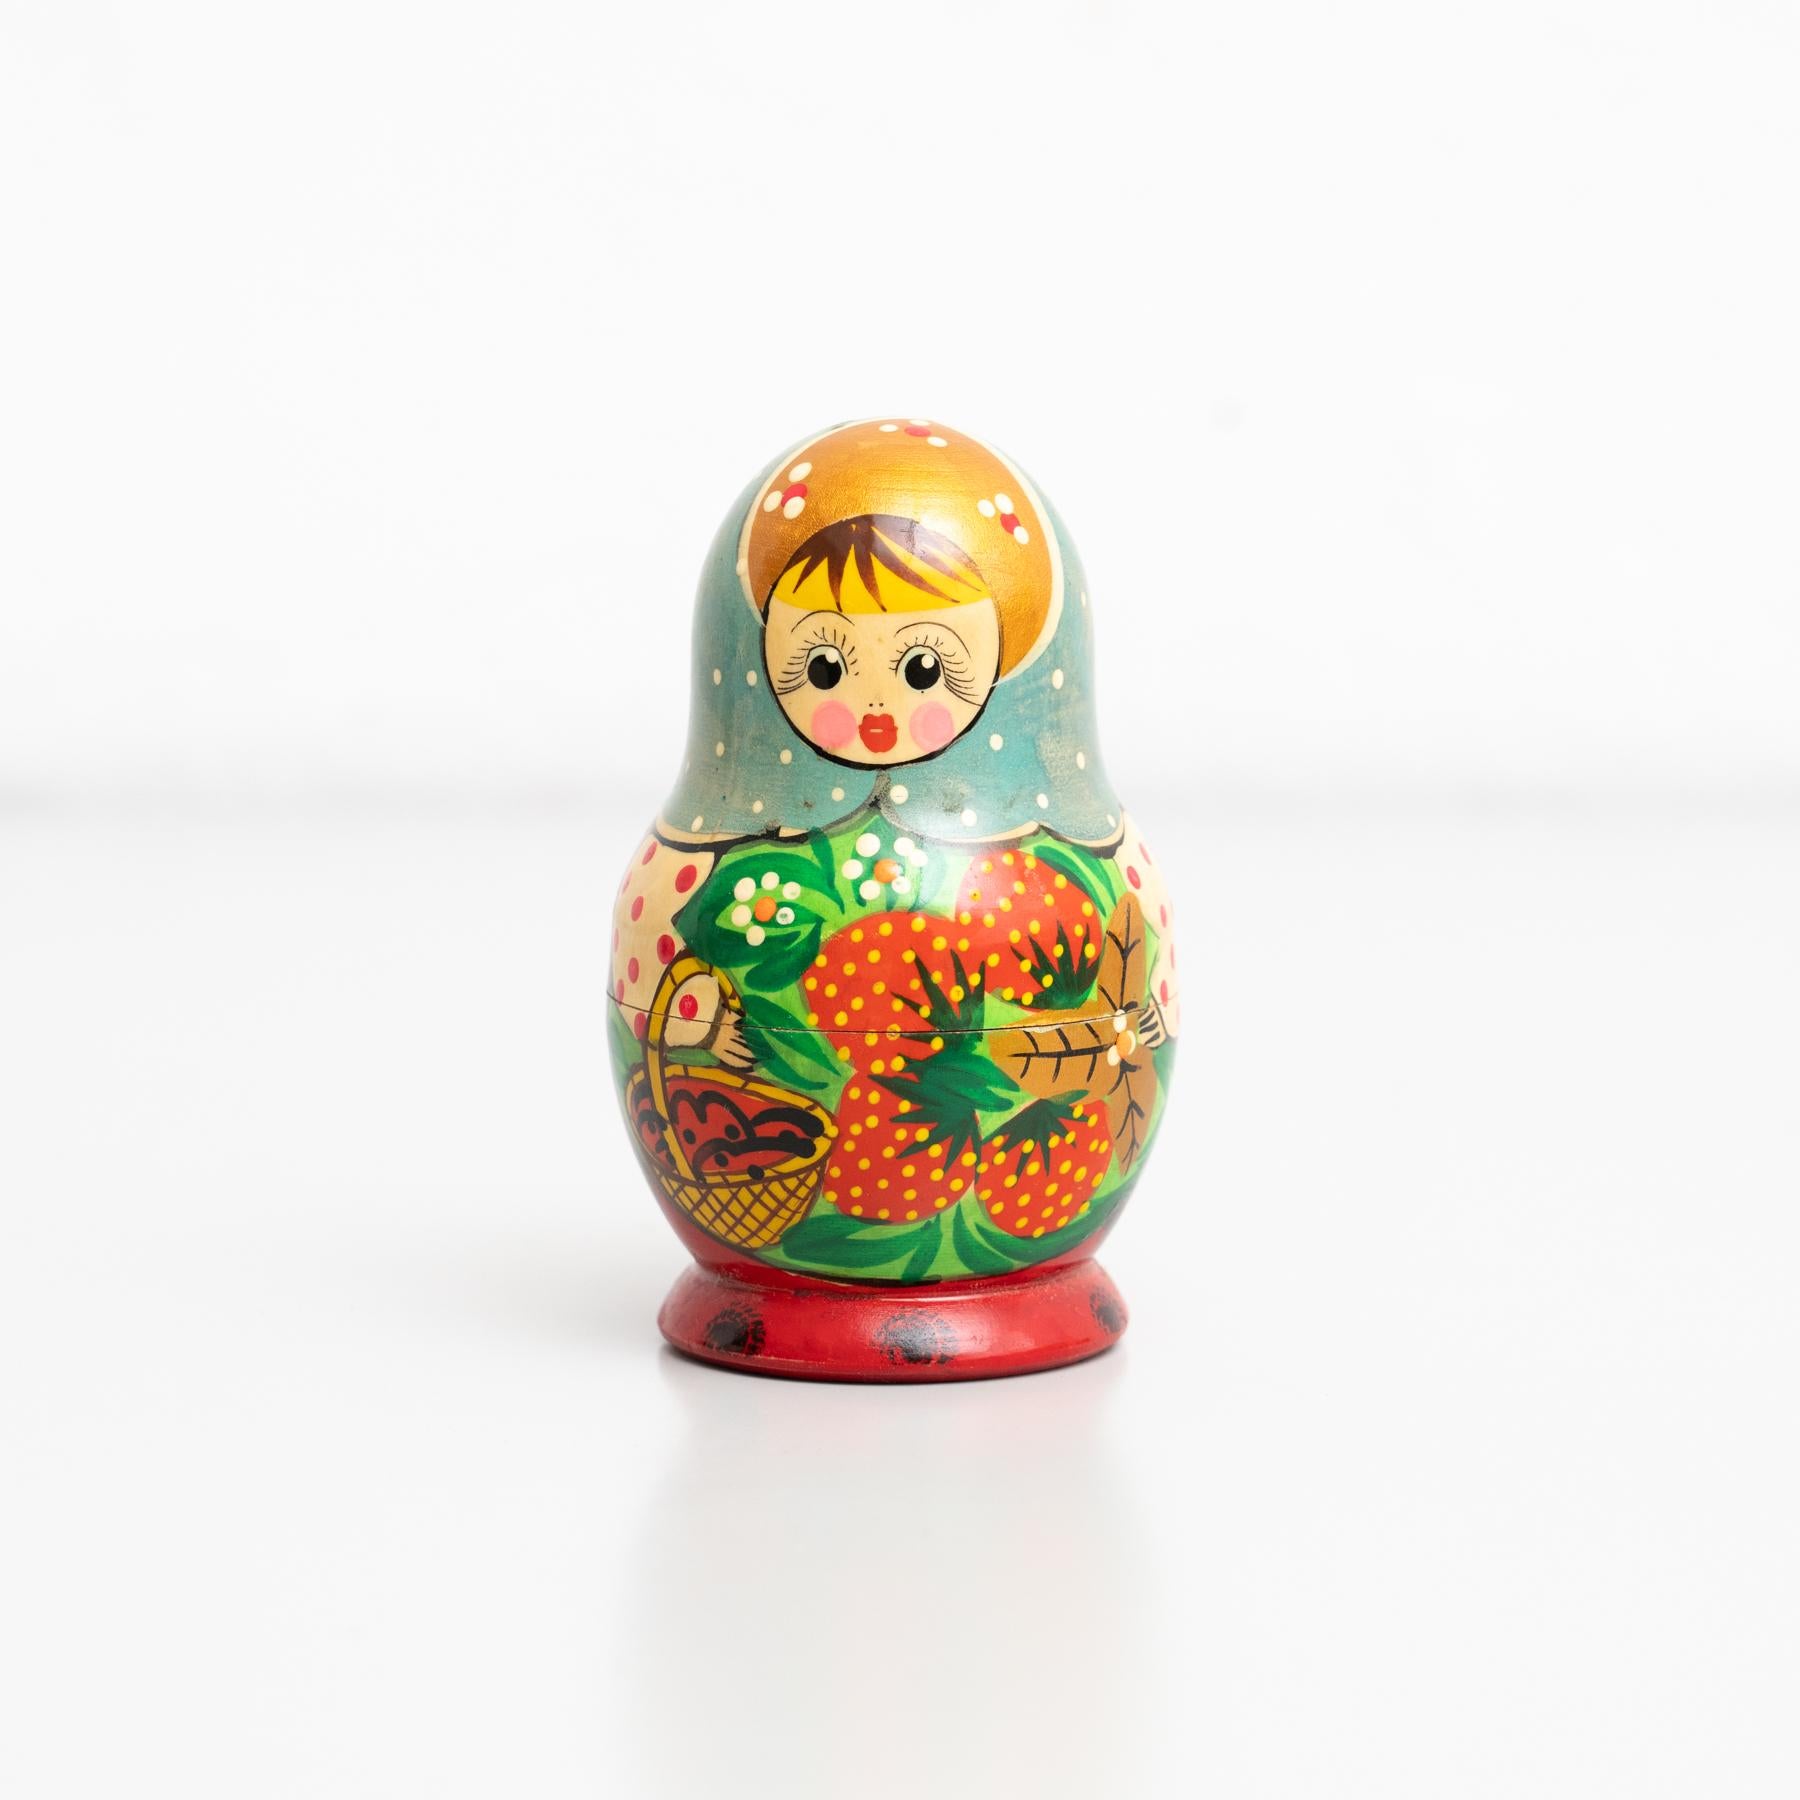 Traditional Russian 'Matrioska' doll wooden figure. Hand-painted.

Made by unknown manufacturer in Russia, circa 1960.

In original condition, with minor wear consistent with age and use, preserving a beautiful